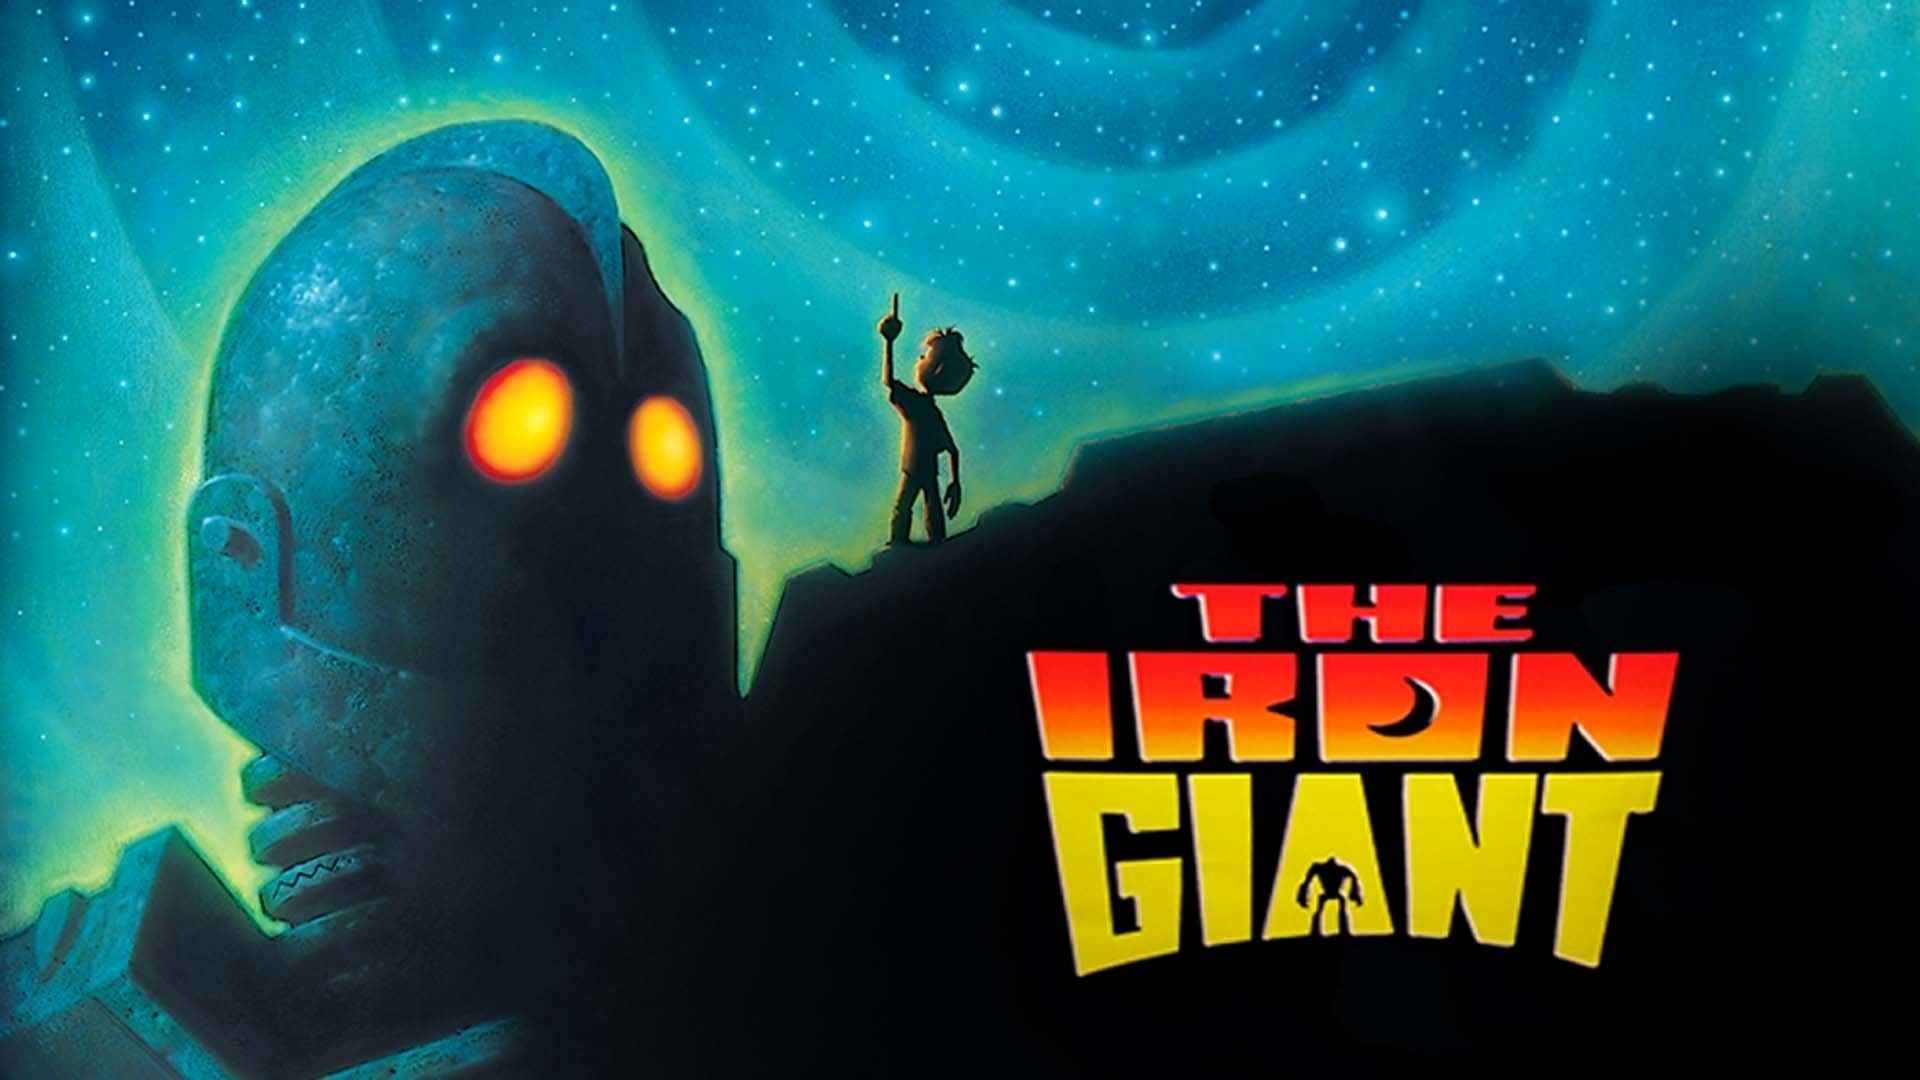 Iron Giant, Top free, Animated backgrounds, 1920x1080 Full HD Desktop